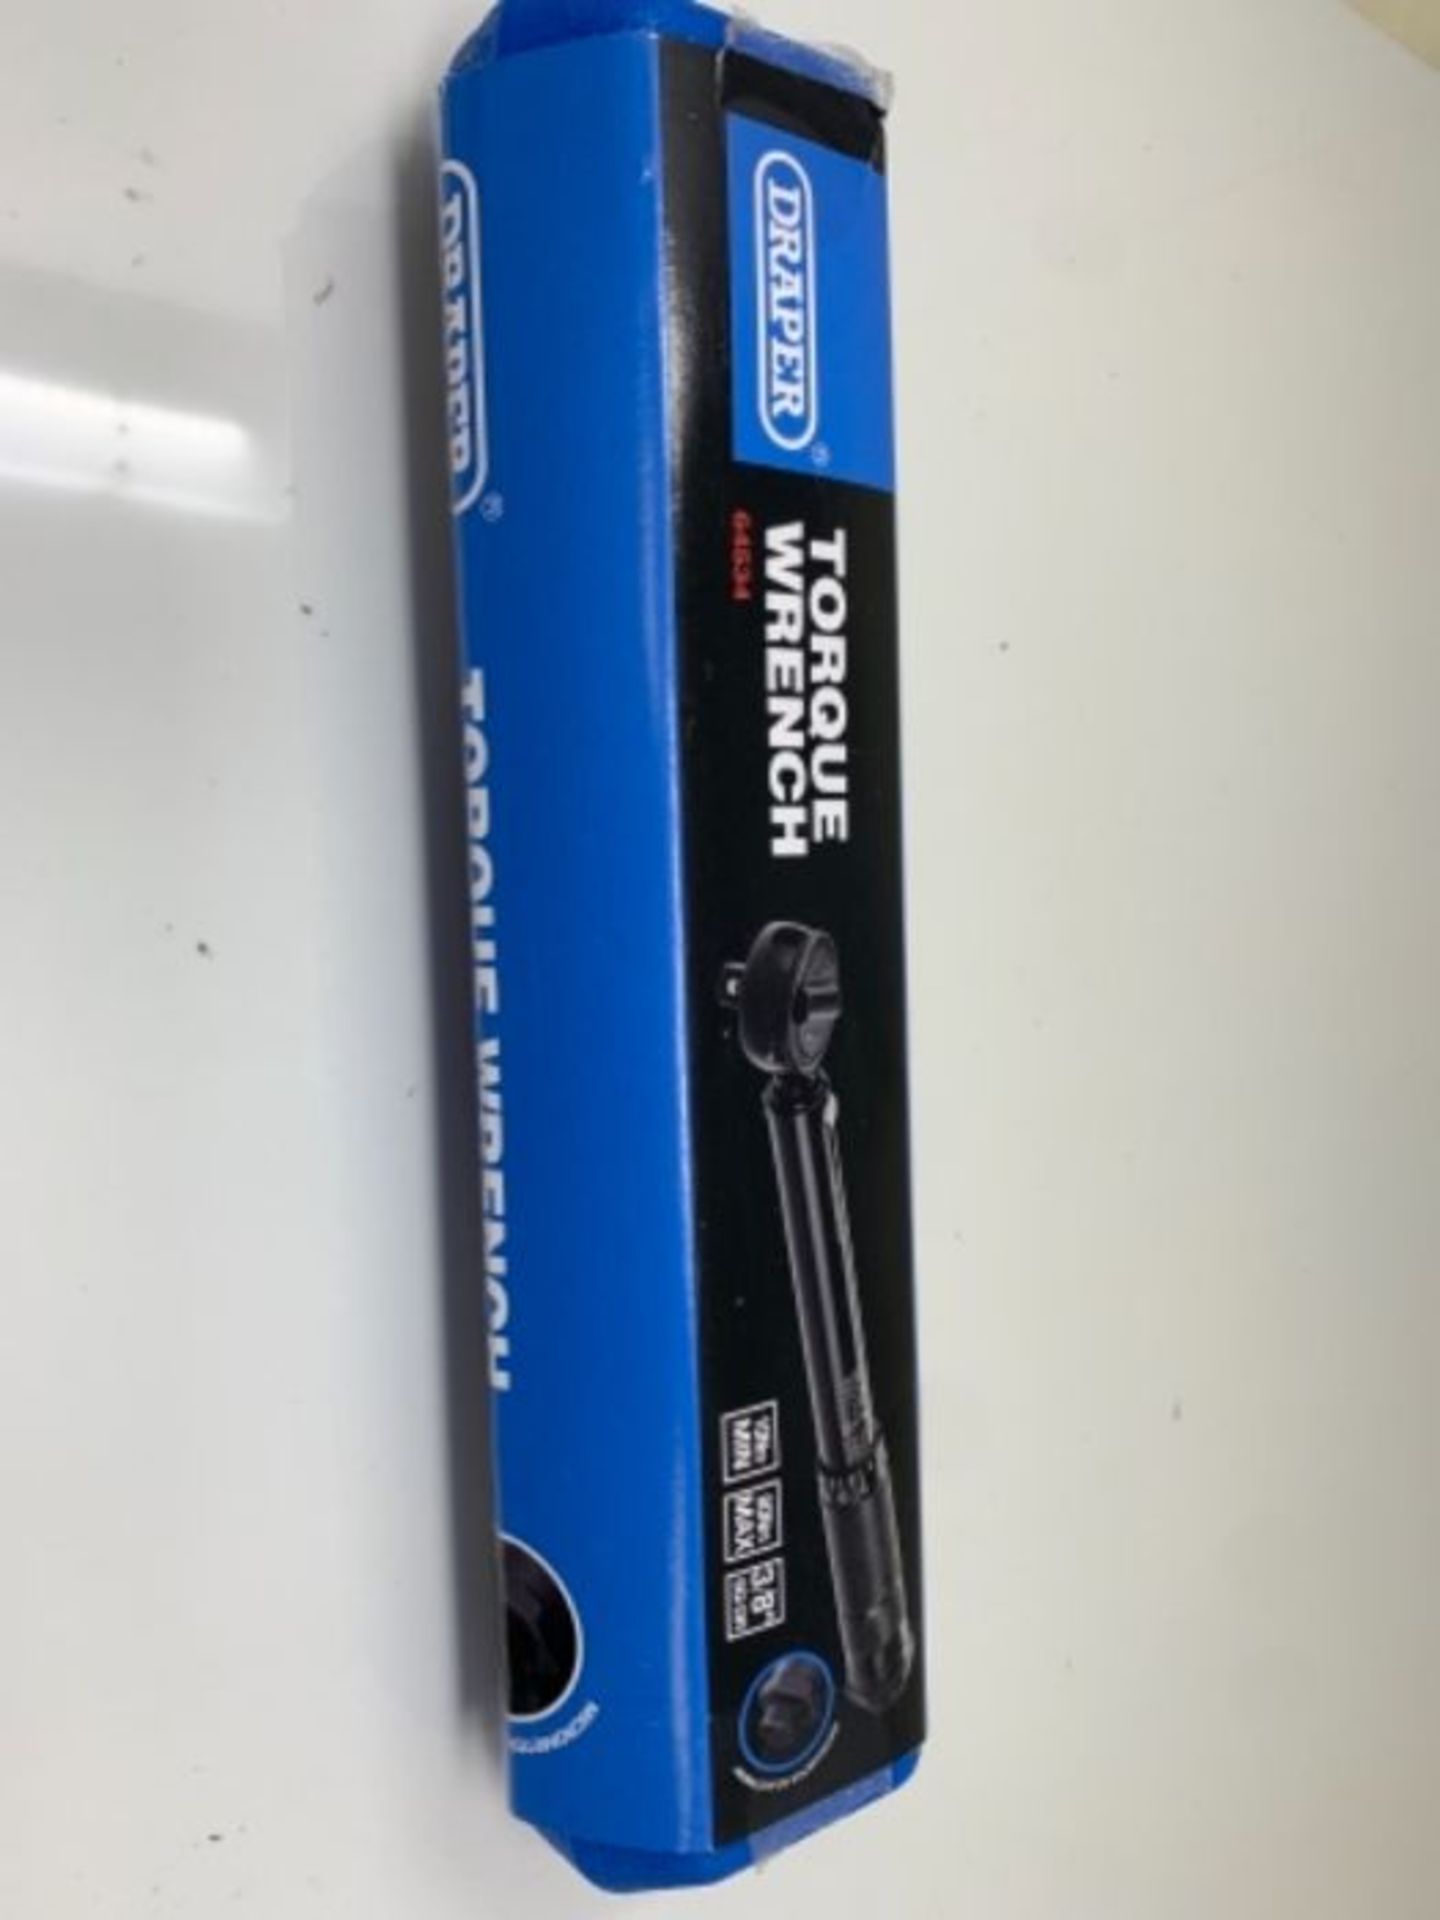 Draper 64534 Square Drive Ratchet Torque Wrench 3/8 Inch - Image 2 of 3